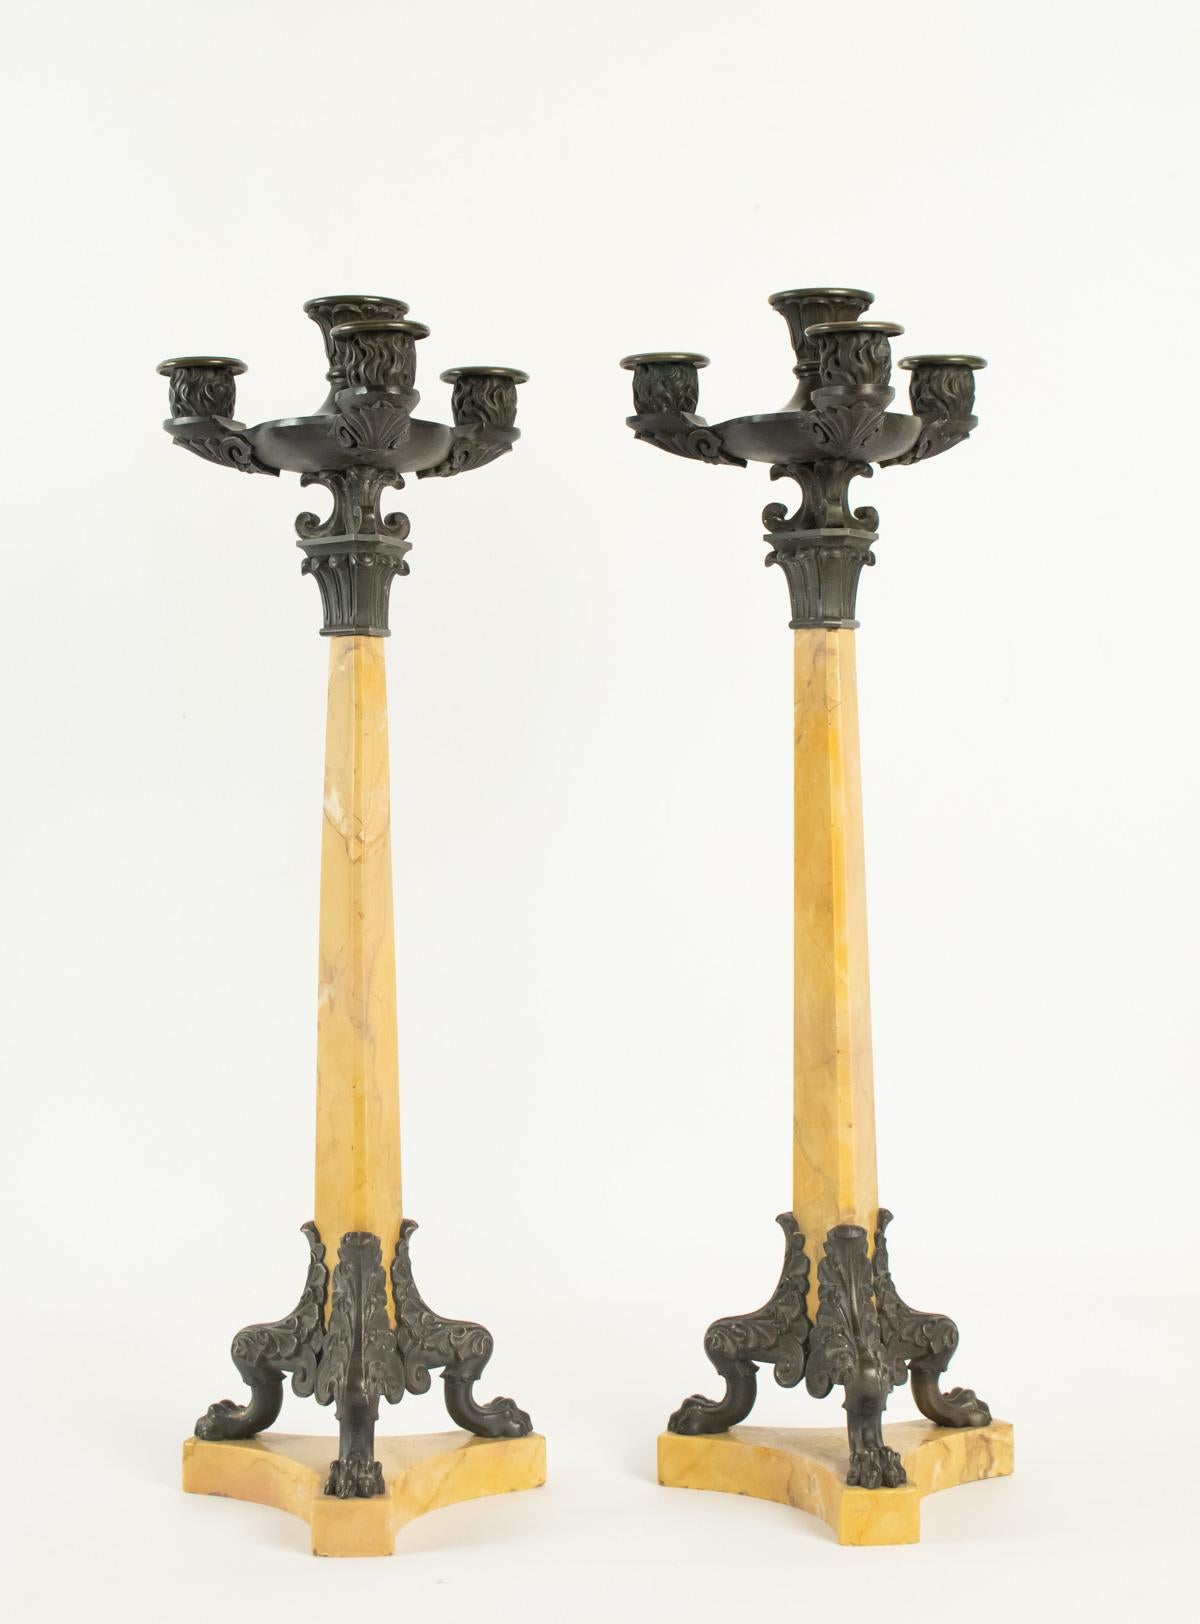 Pair of candelabra period restoration Siena yellow marble and patinated bronze, 19th century, 4 fires. 
Measures: H 55cm, D 18cm.